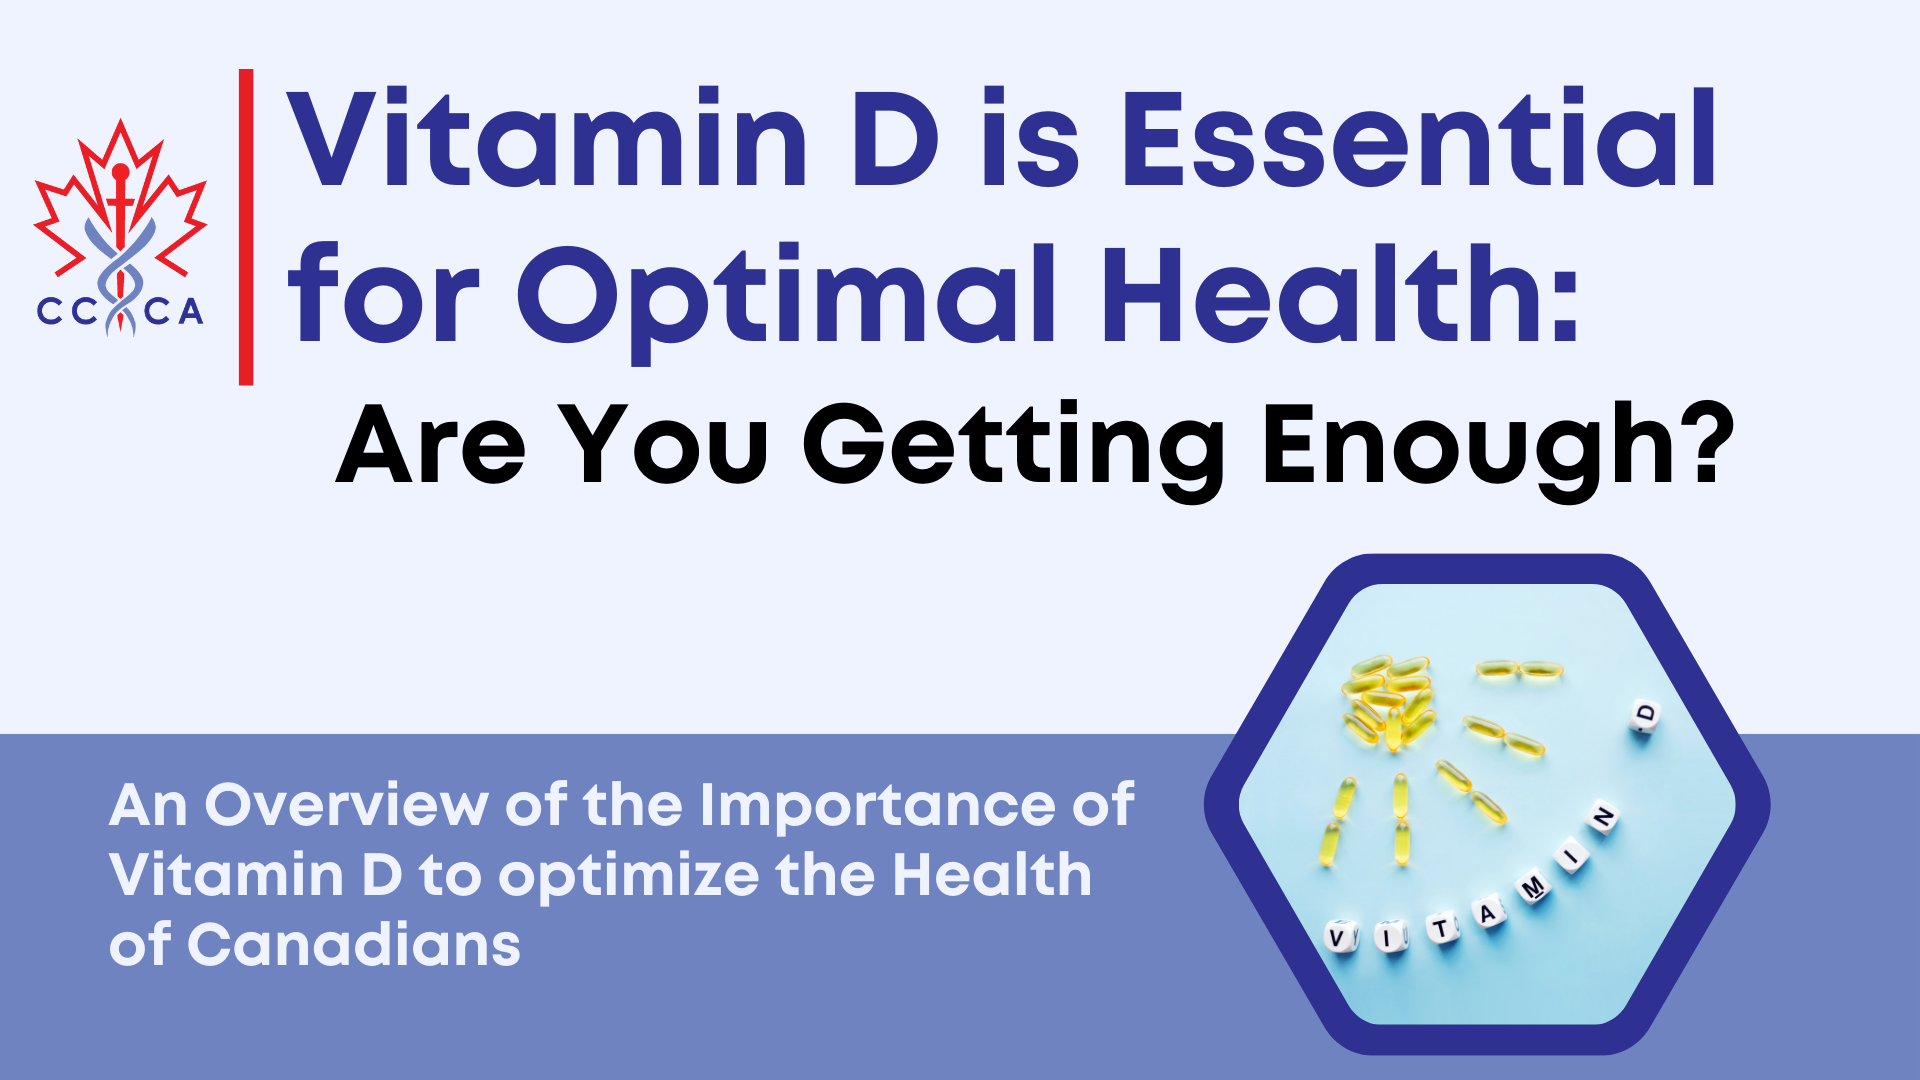 Vitamin D is Essential for Optimal Health